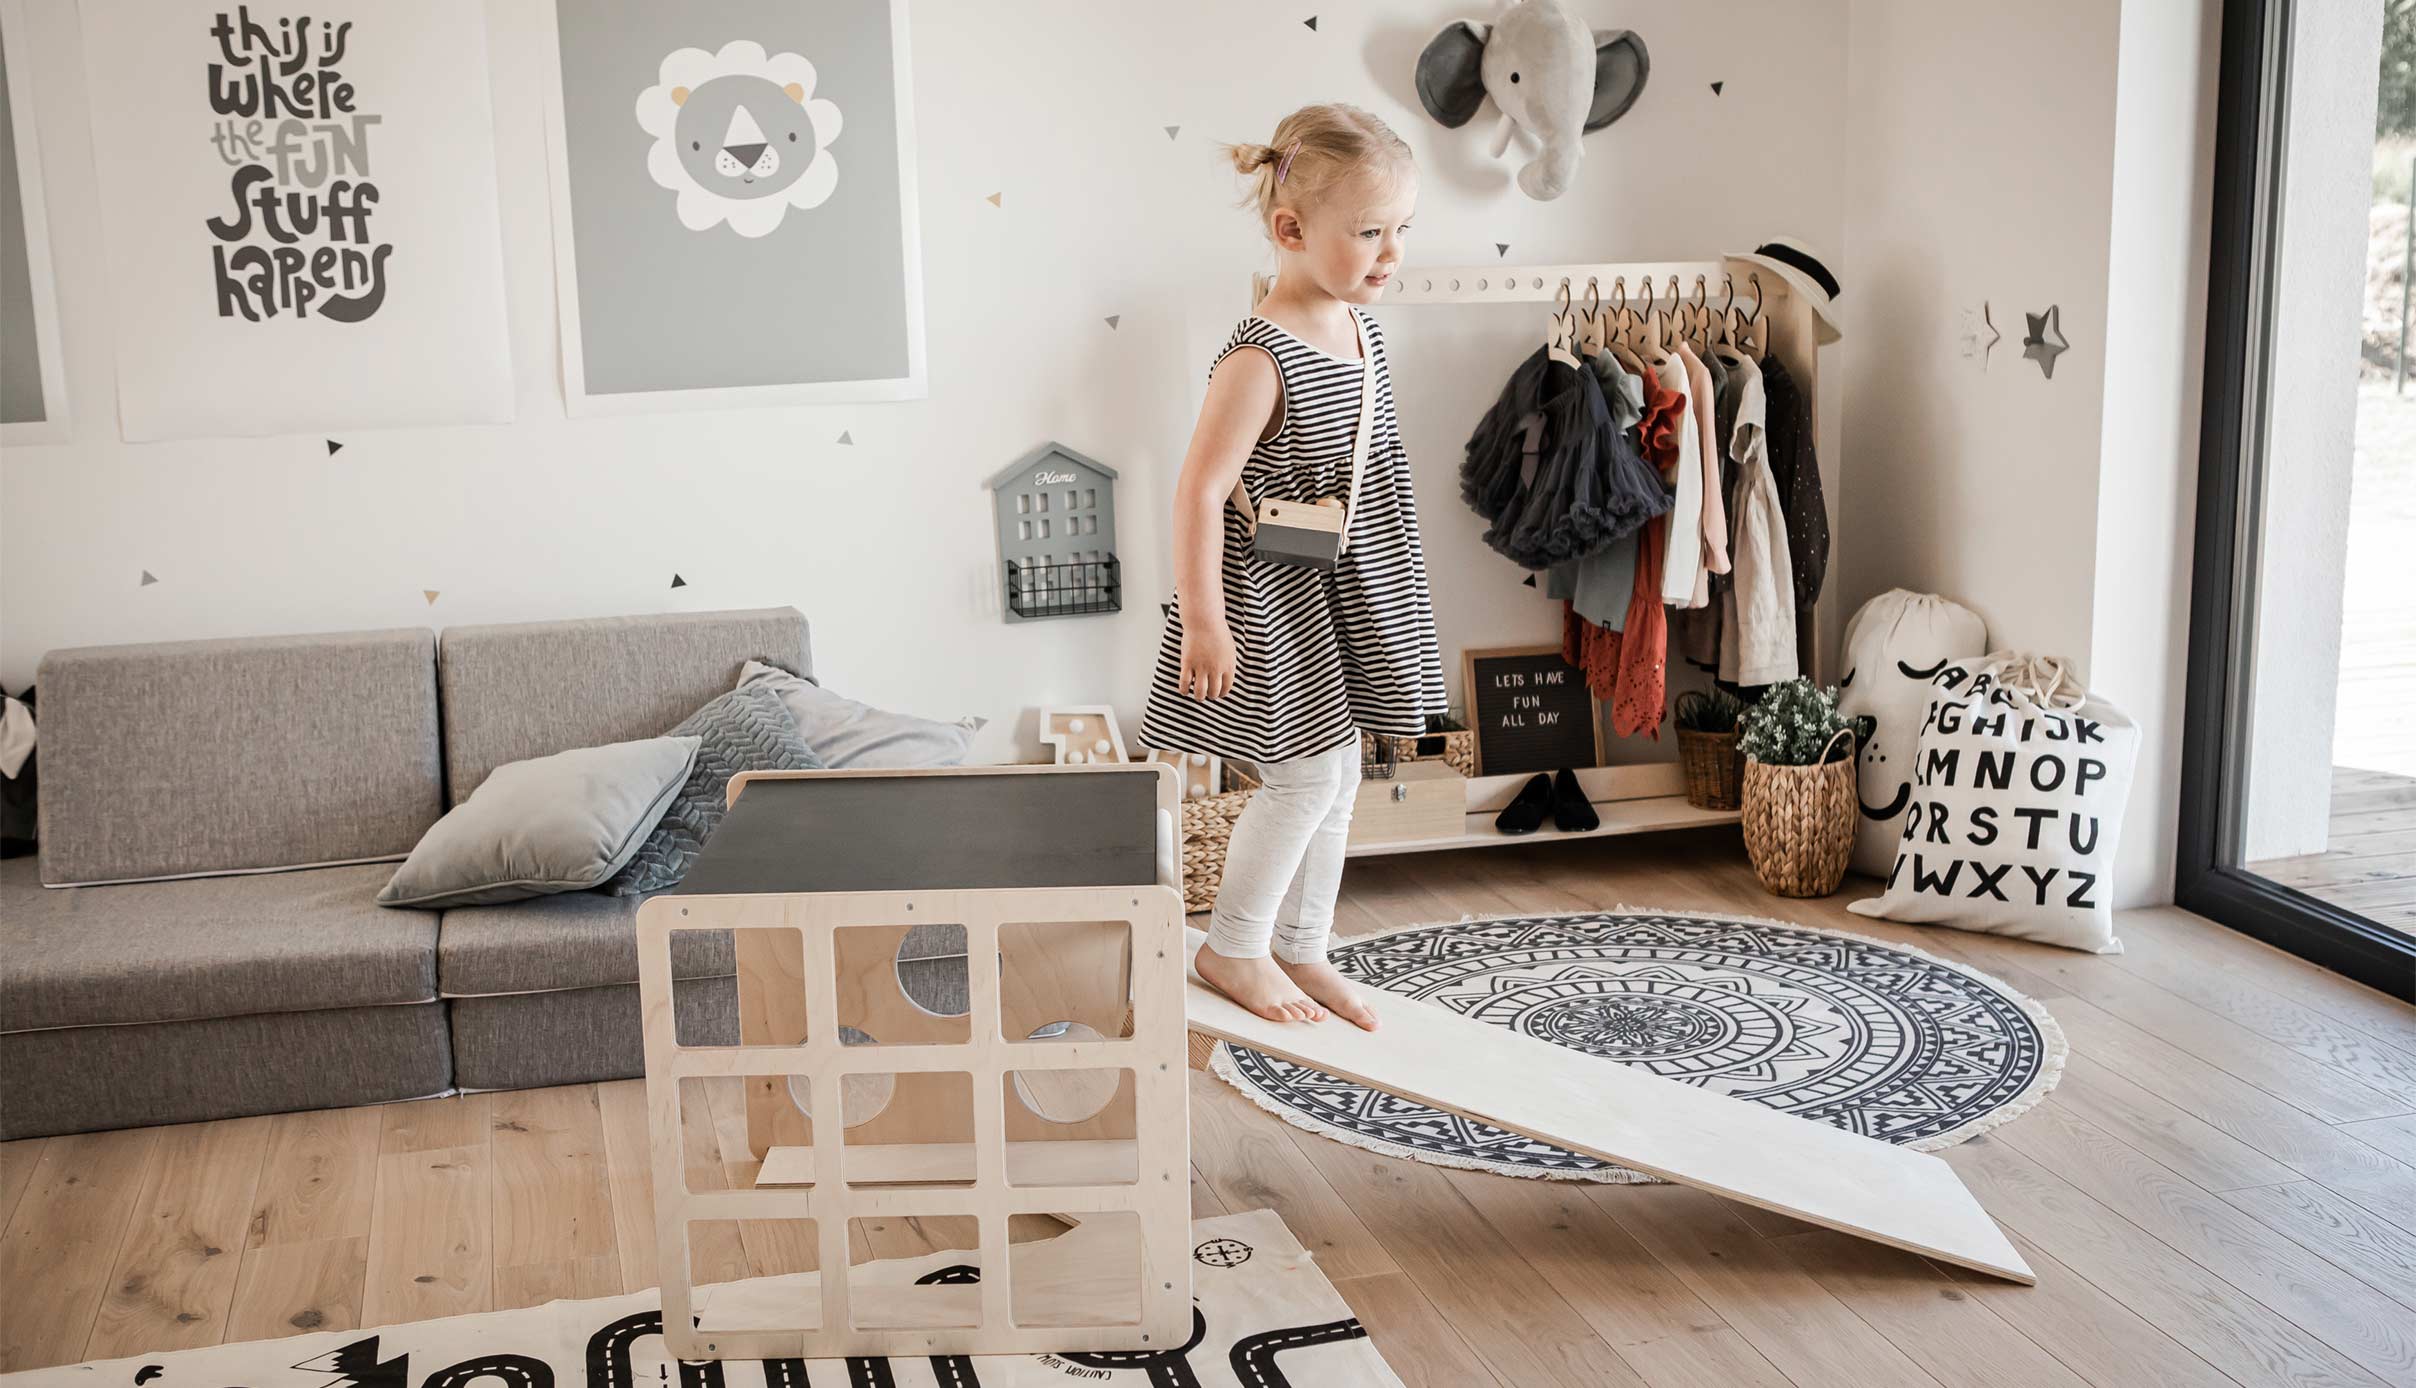 A little girl standing on a wooden platform in a living room.